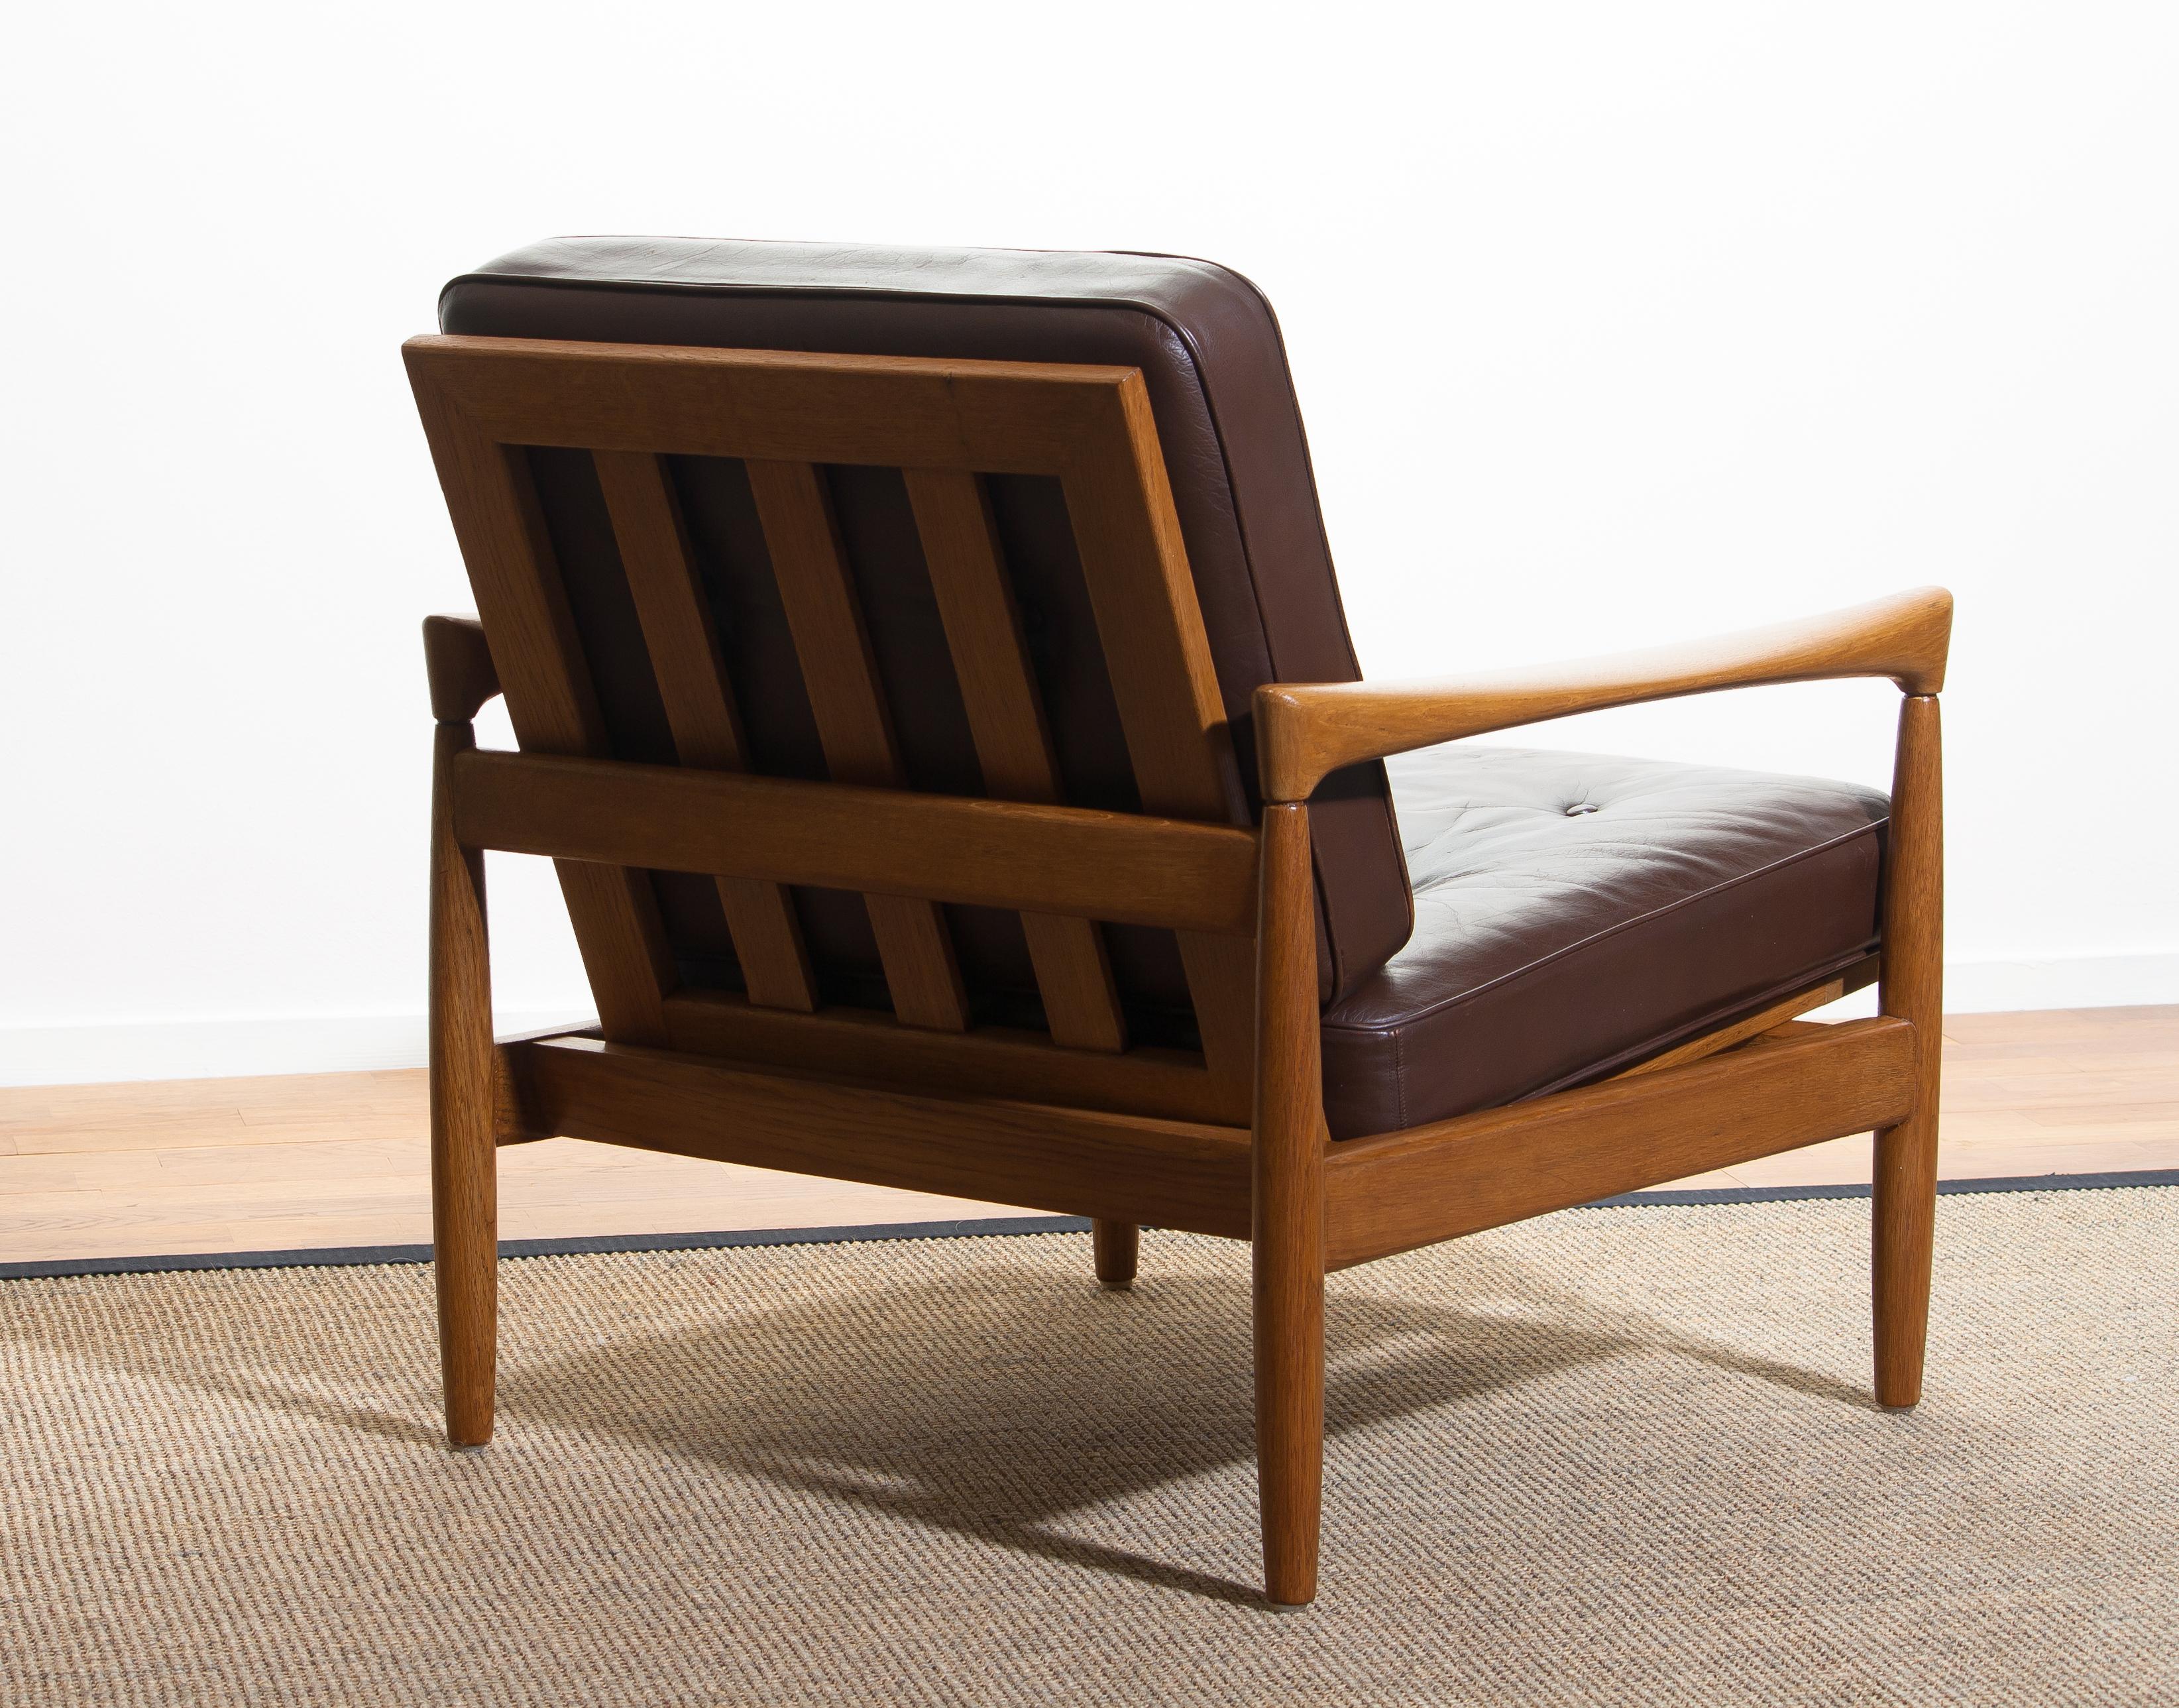 1960s, Oak with Brown Leather Lounge Chair by Erik Wörtz for Bröderna Anderssons In Good Condition In Silvolde, Gelderland